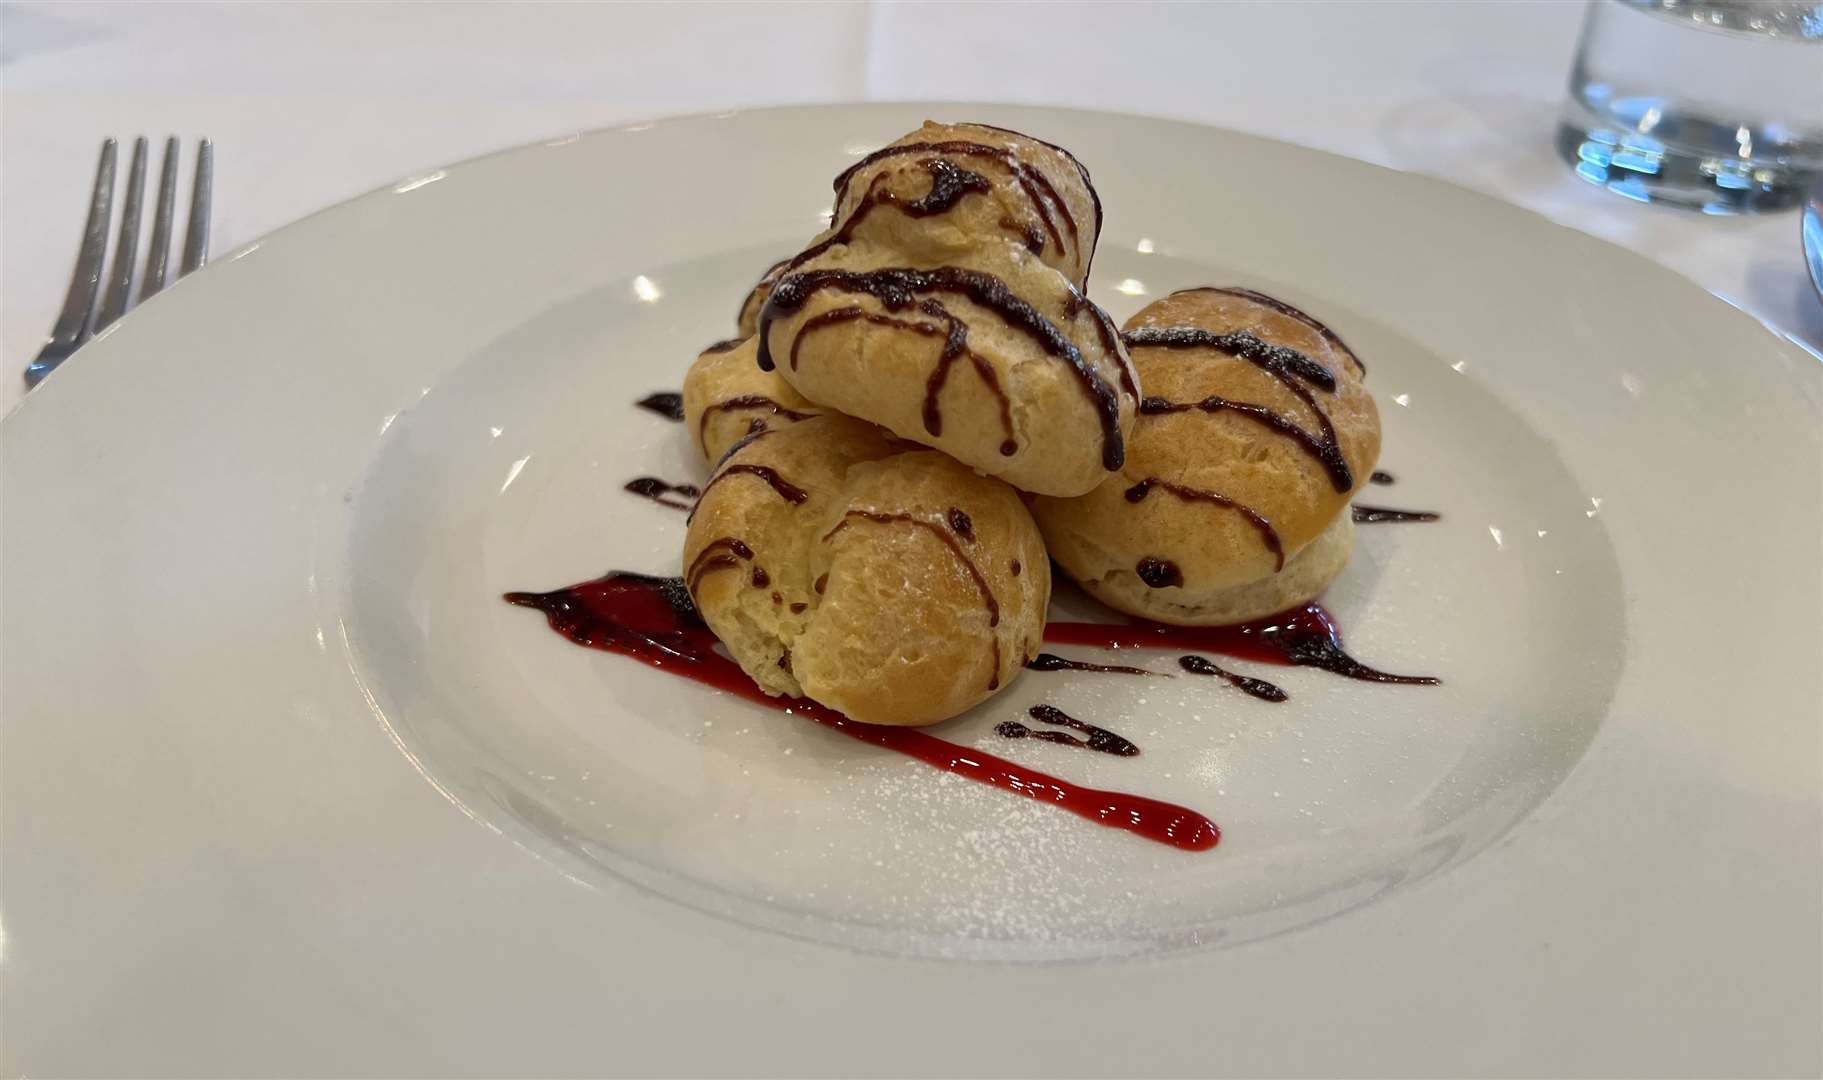 Profiteroles - hard to resist and that drizzle of raspberry was well judged